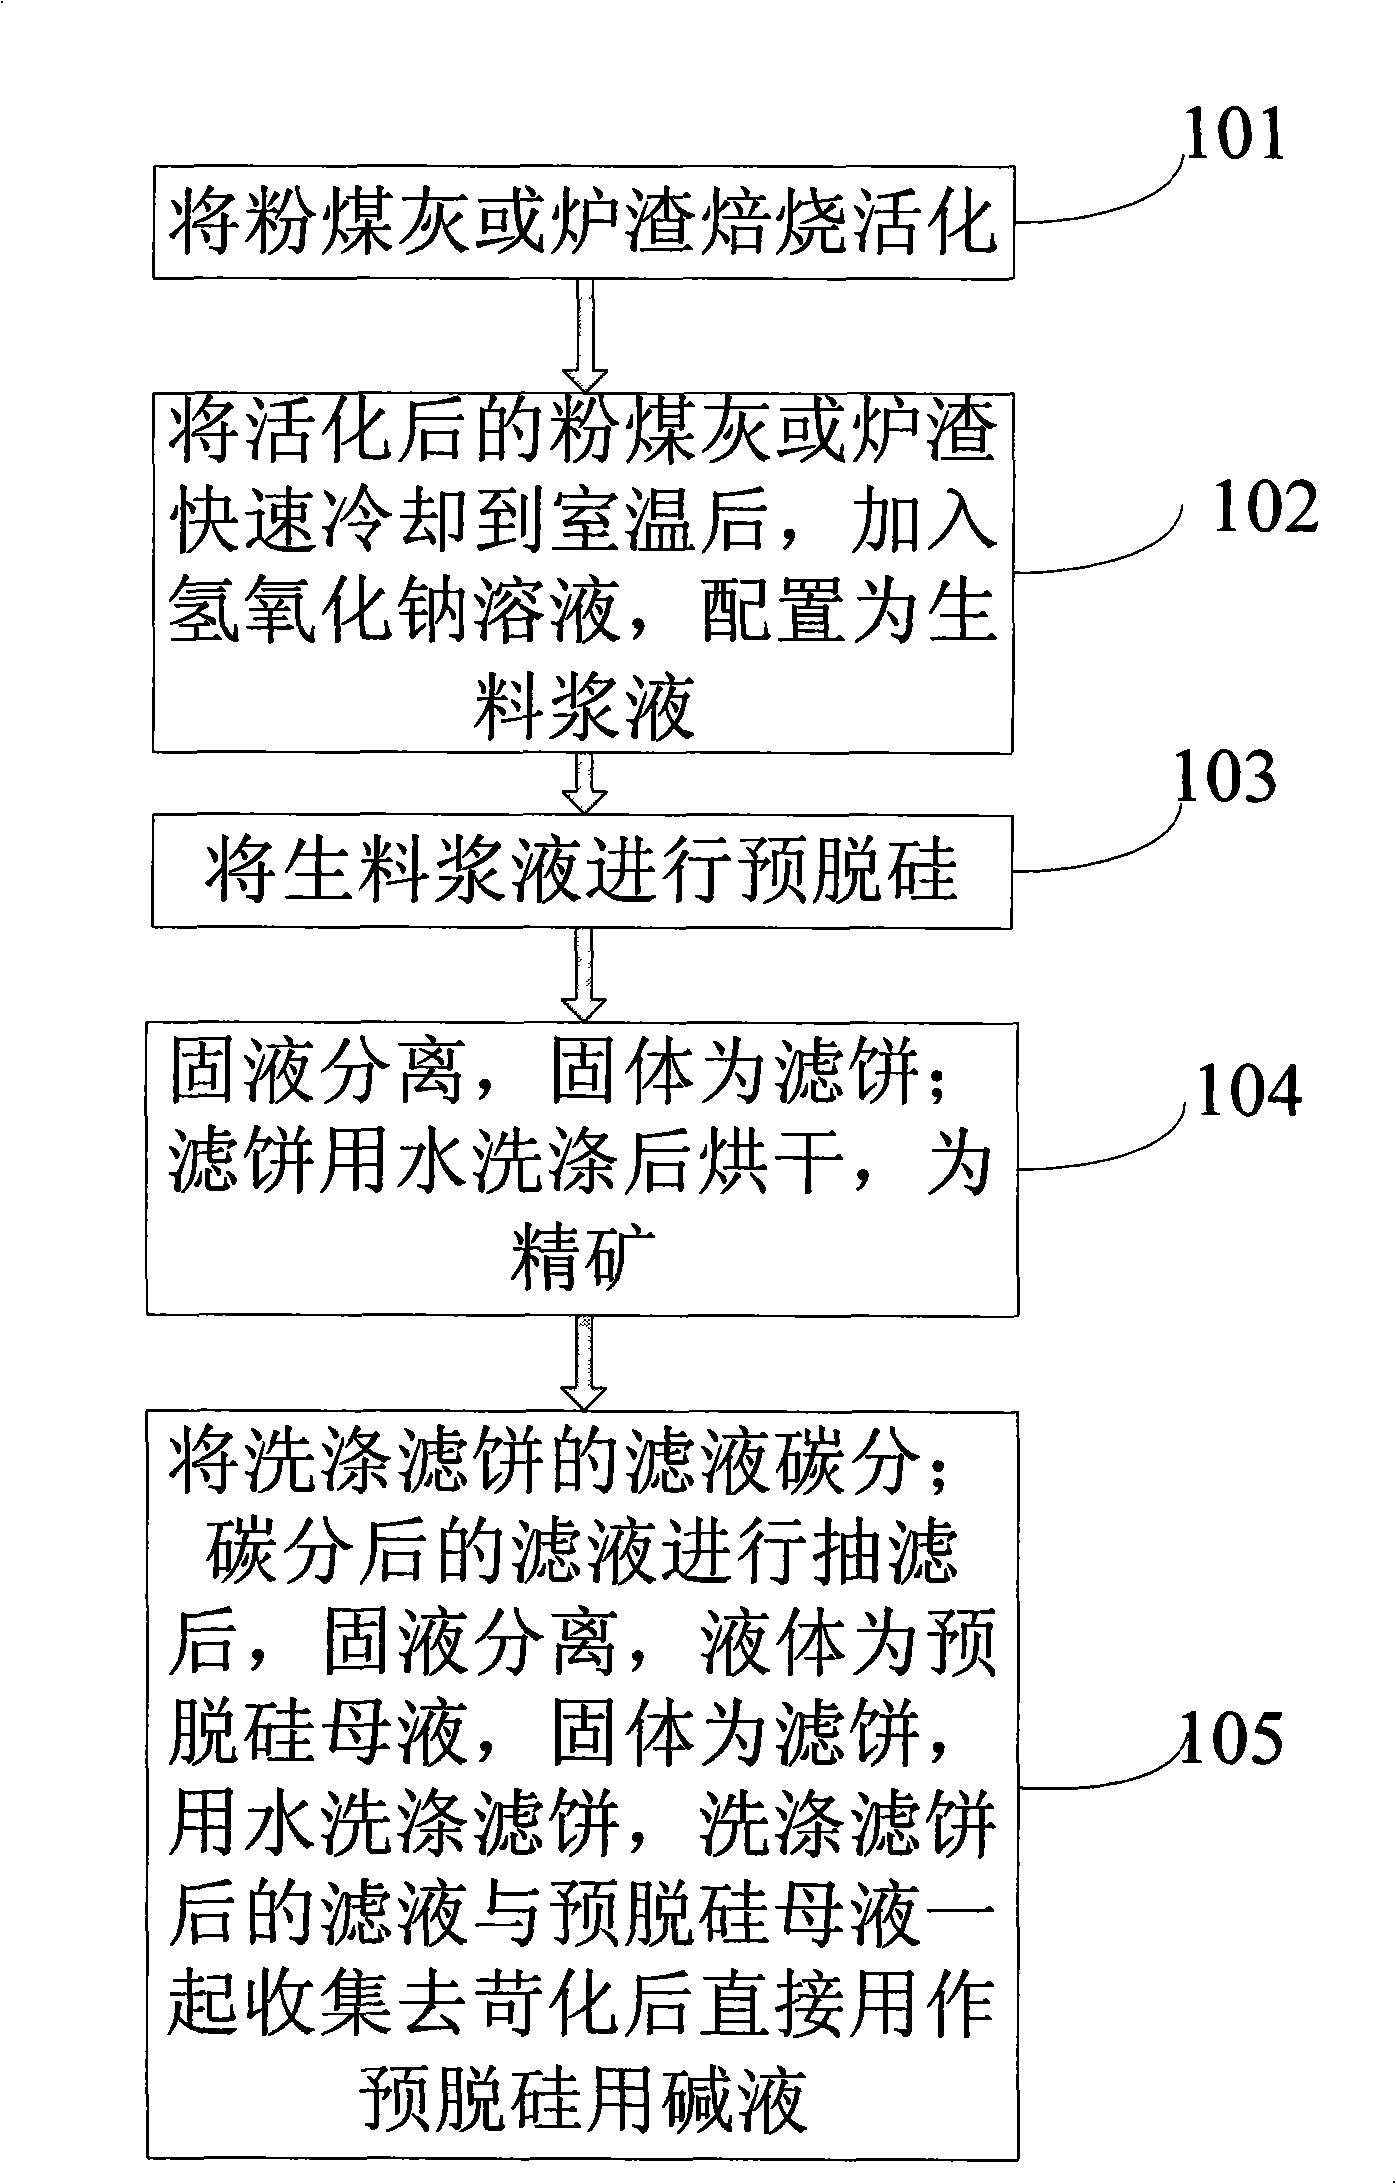 Pre- desiliconizing method from fly ash or slag